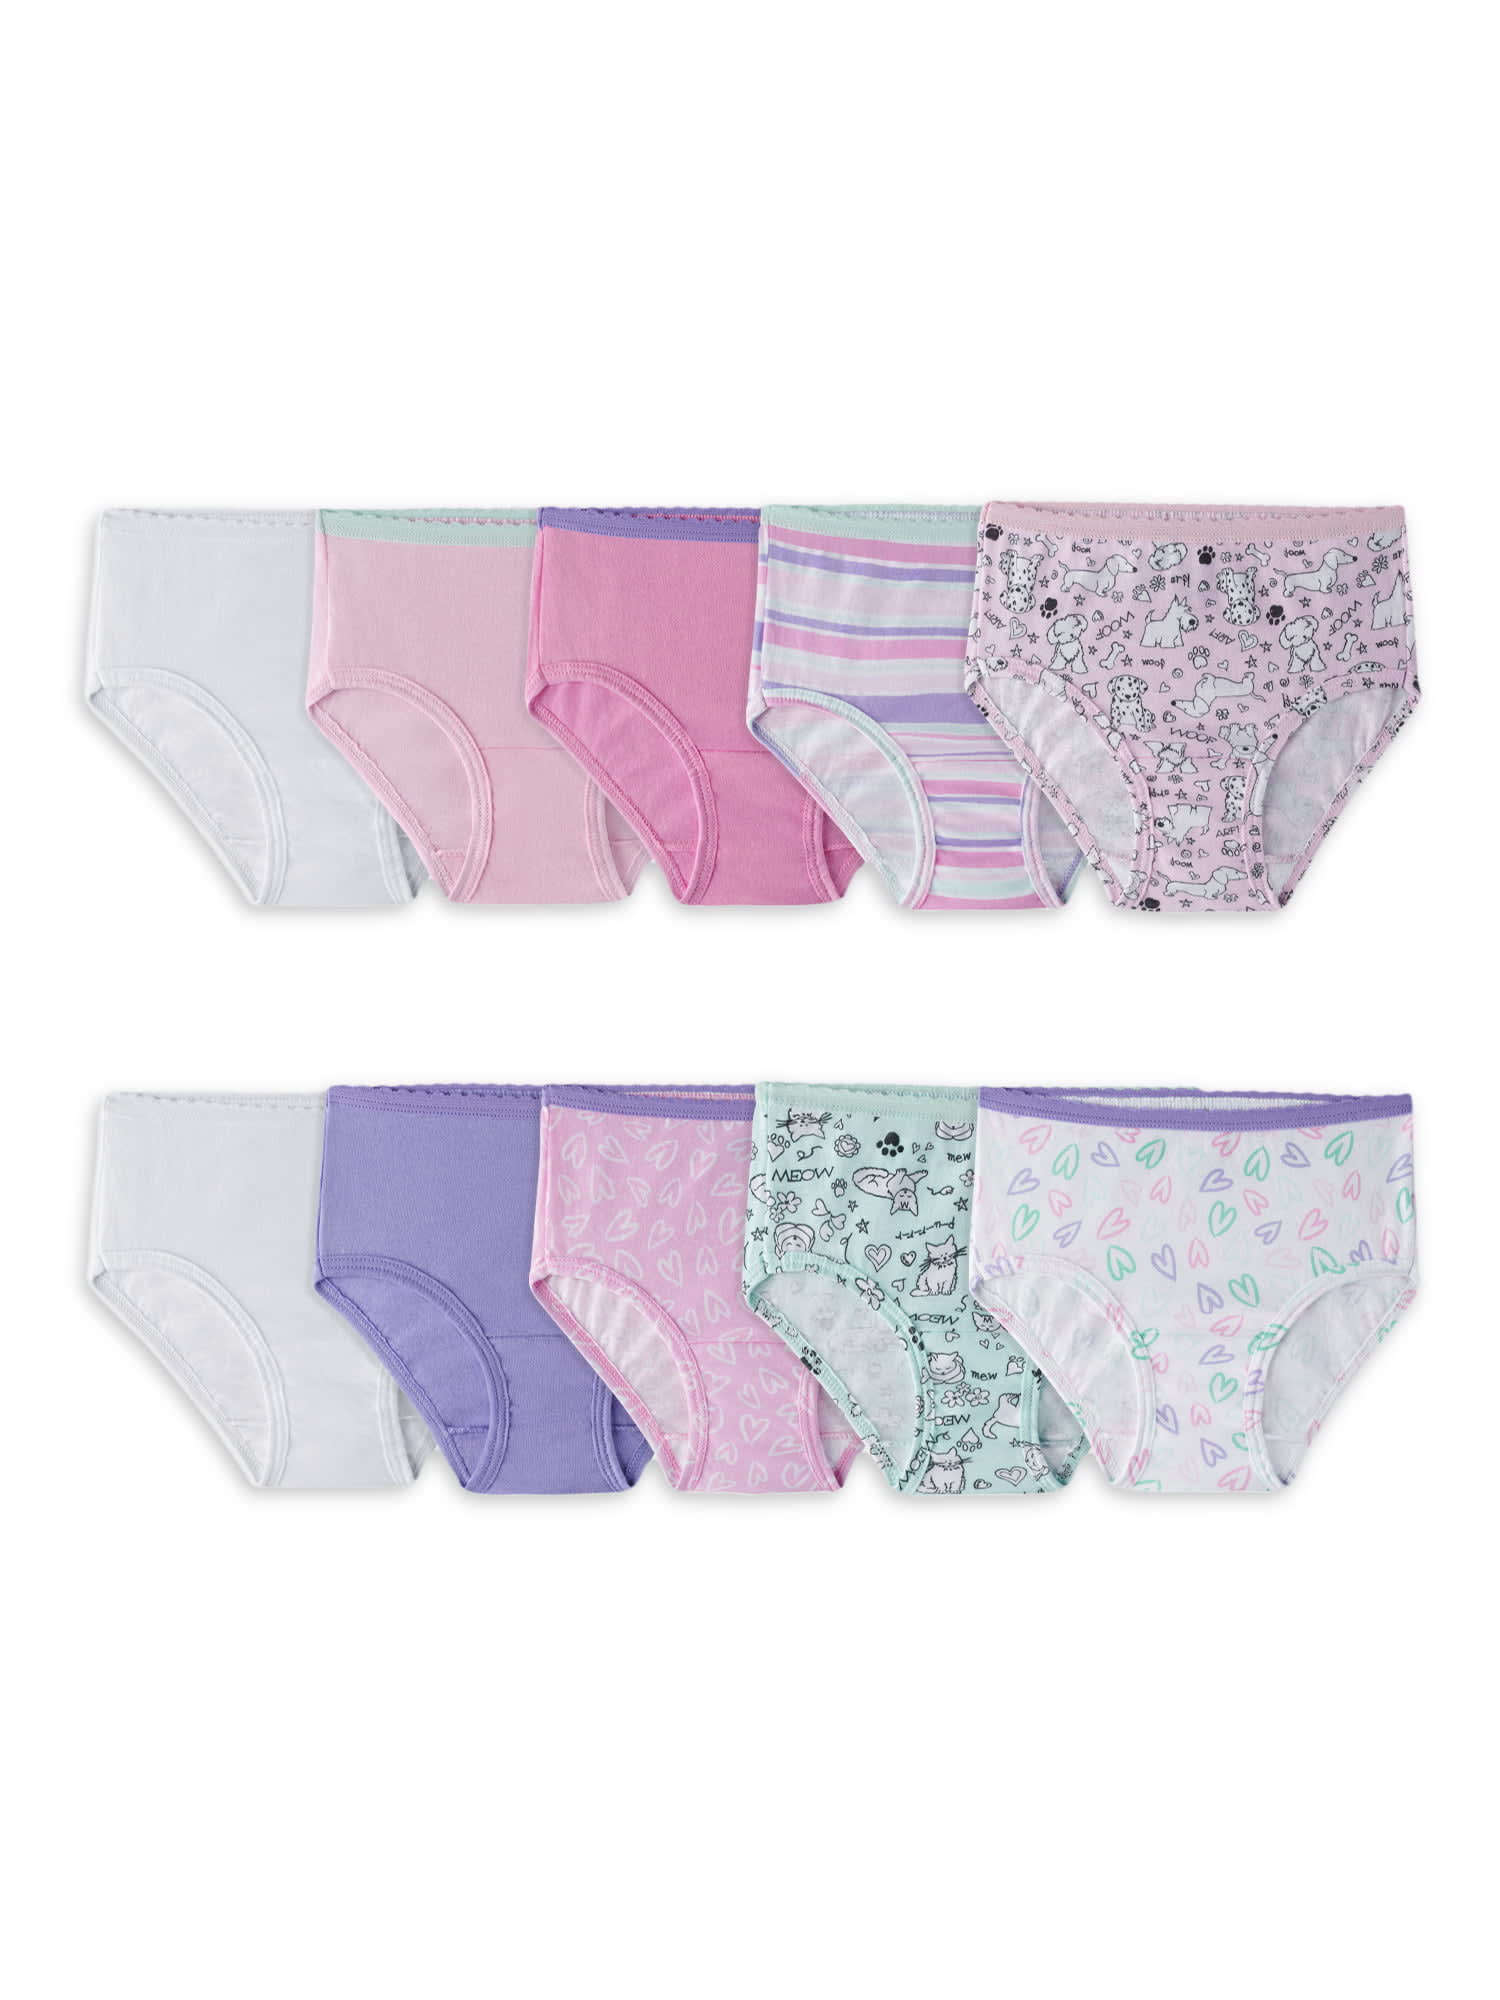 Wonder Nation Toddler Girls Briefs, 6-Pack, Sizes 2T-5T - DroneUp Delivery